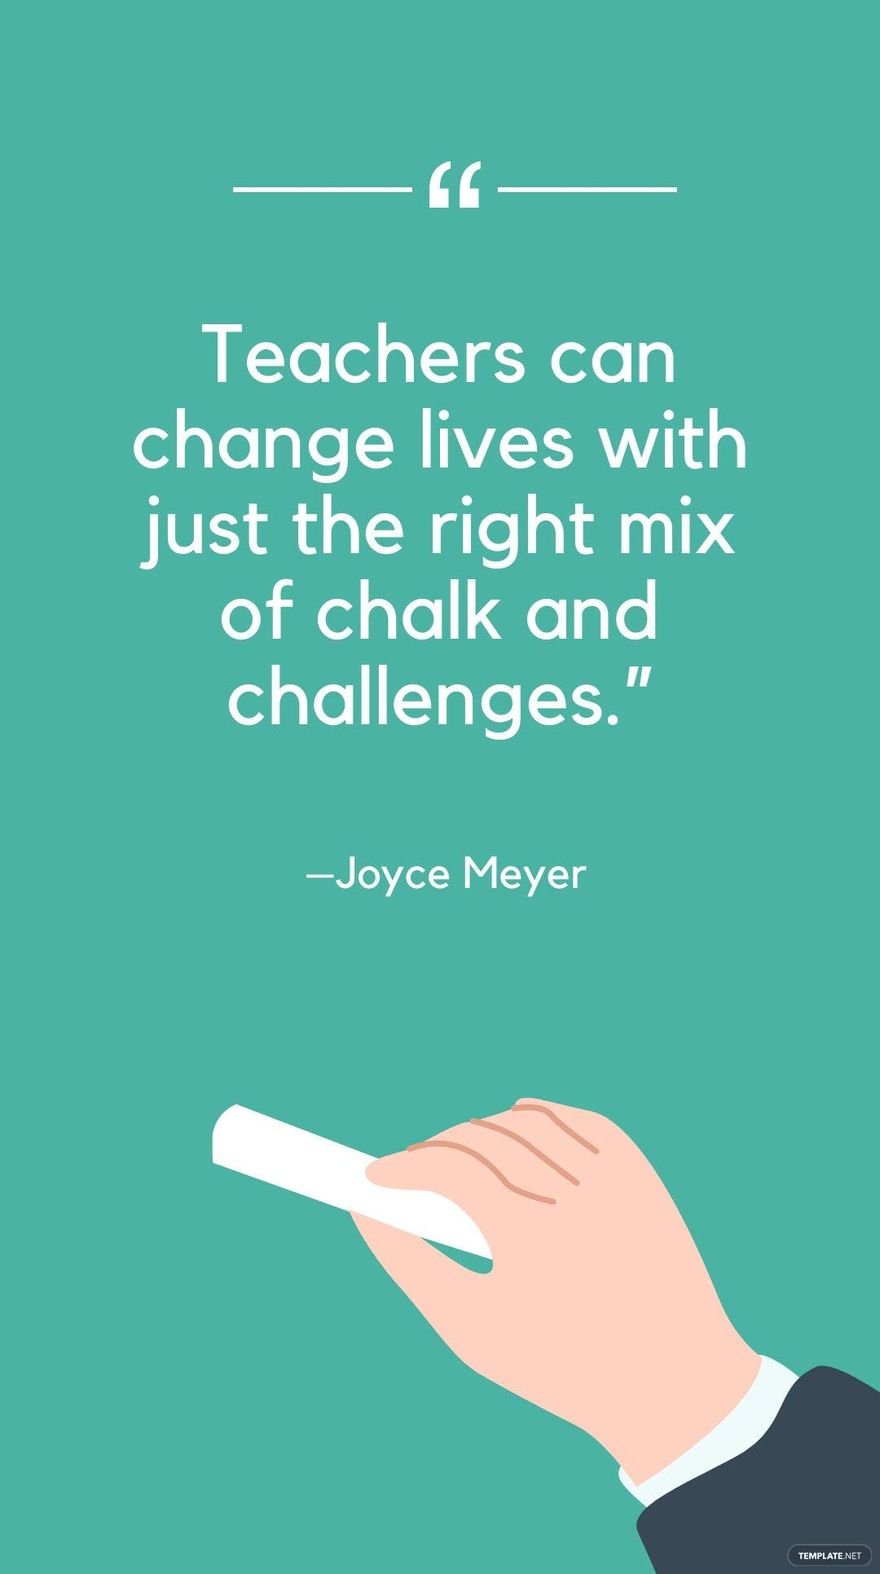 Joyce Meyer - Teachers can change lives with just the right mix of chalk and challenges. in JPG